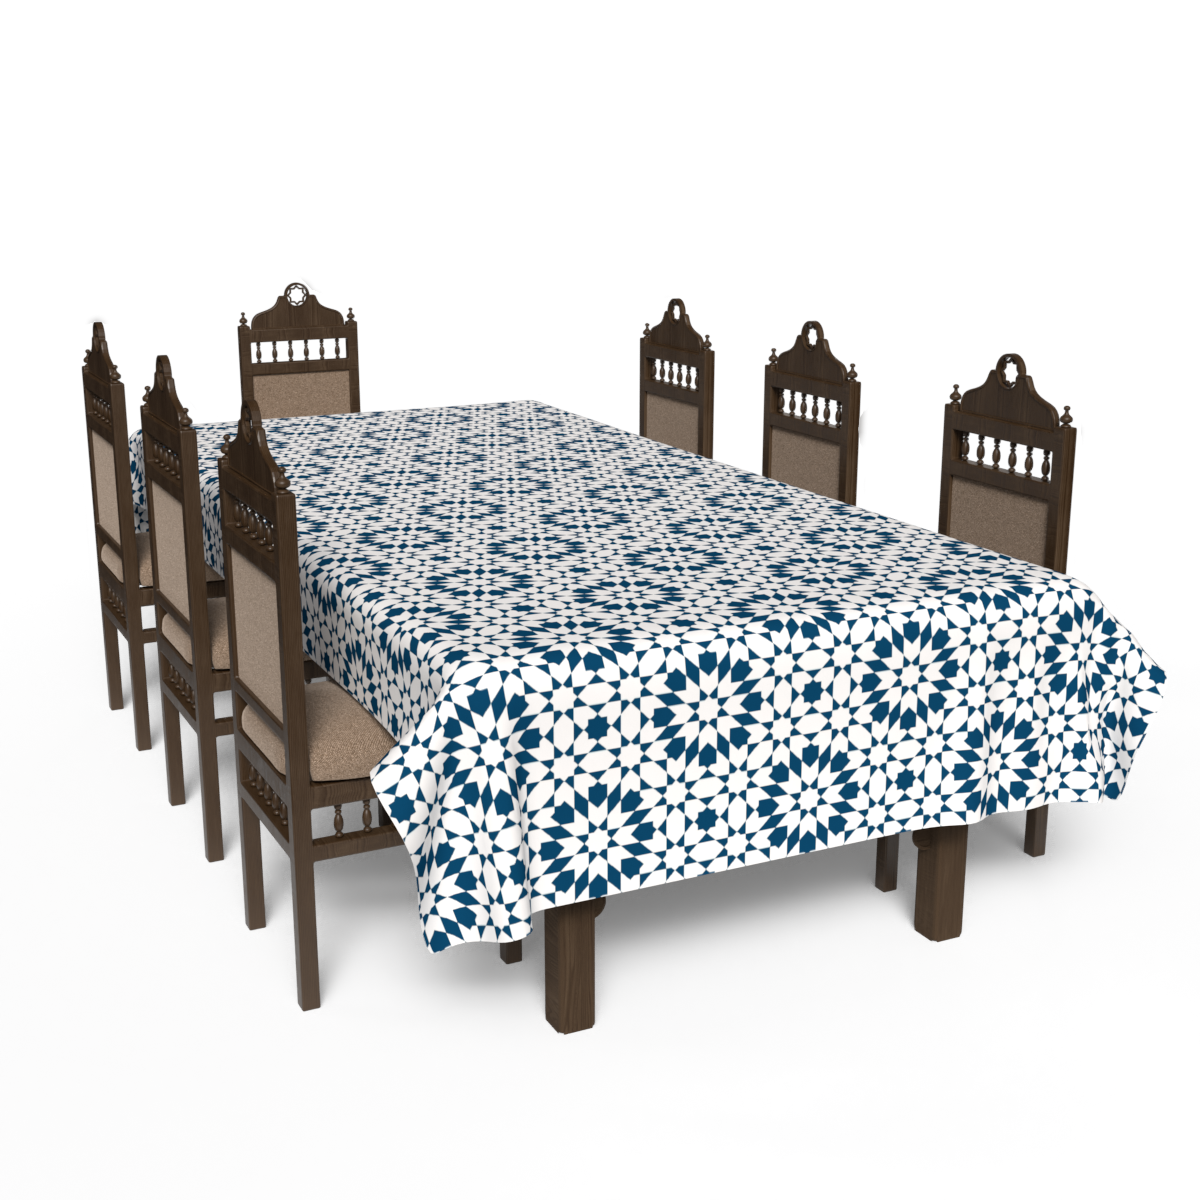 Table cloth - multiple sizes - ROM563